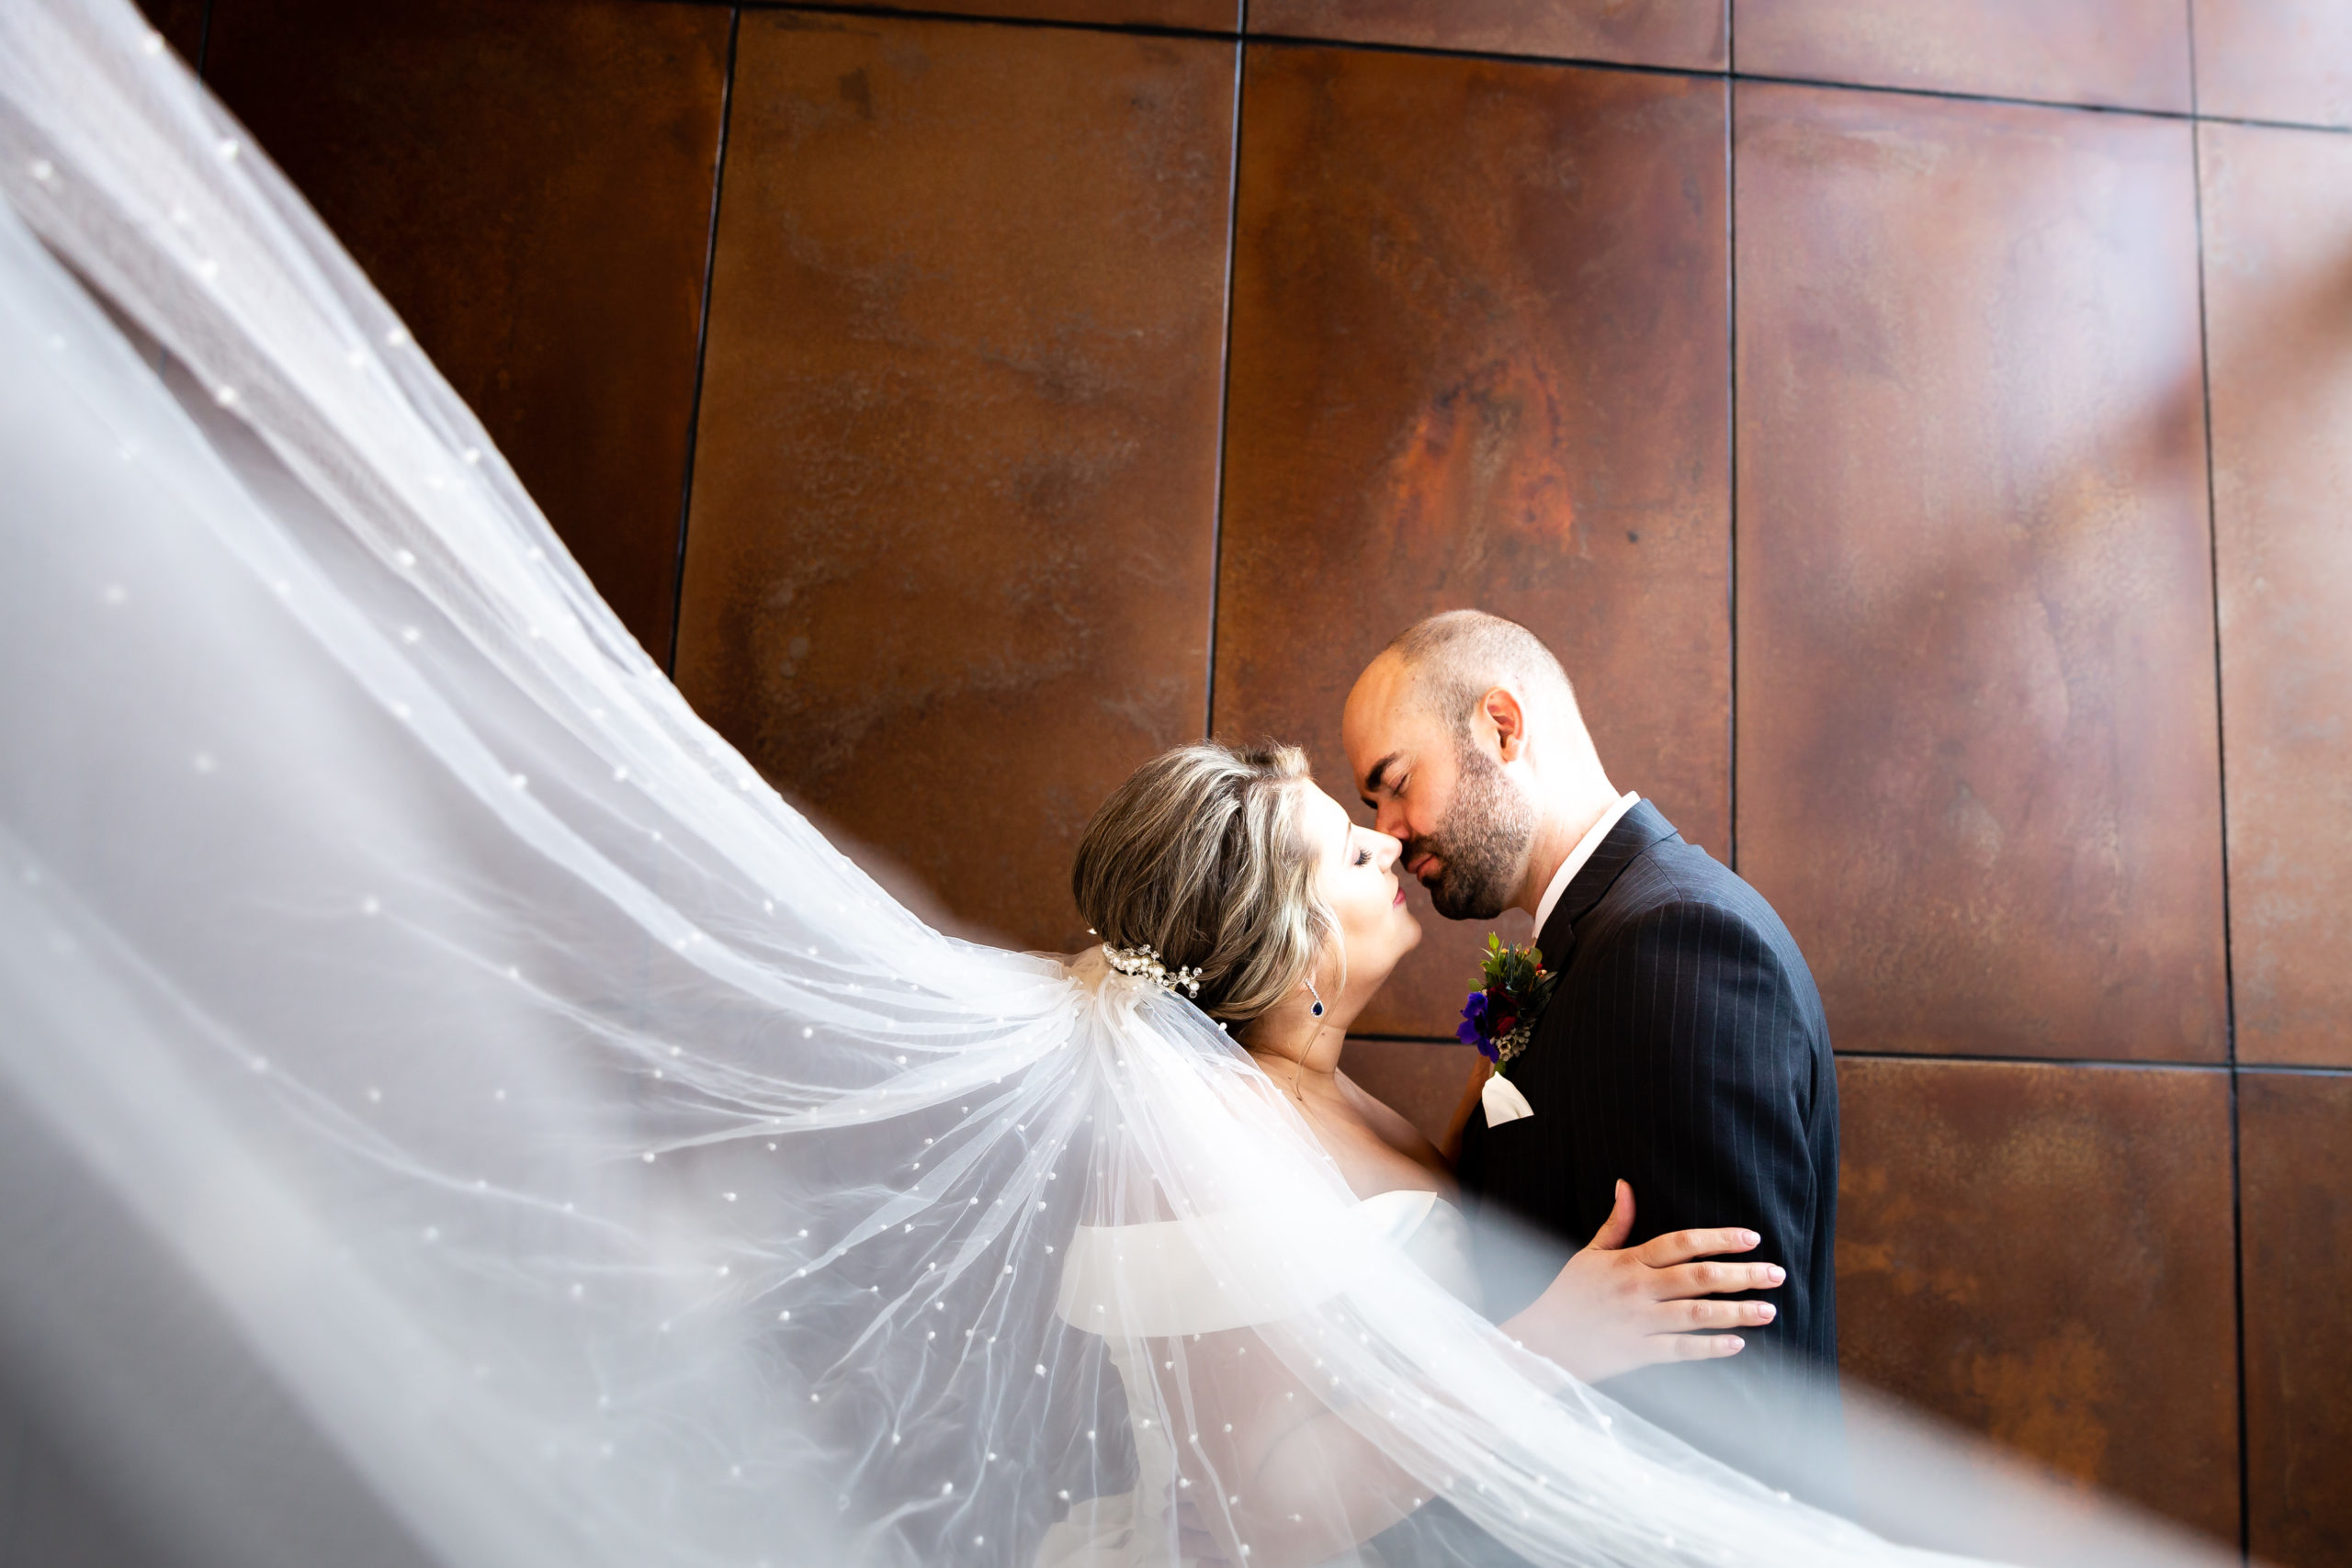 Portrait of bride and groom as her veil swoops towards the camera with a large copper paneled wall as the backdrop.